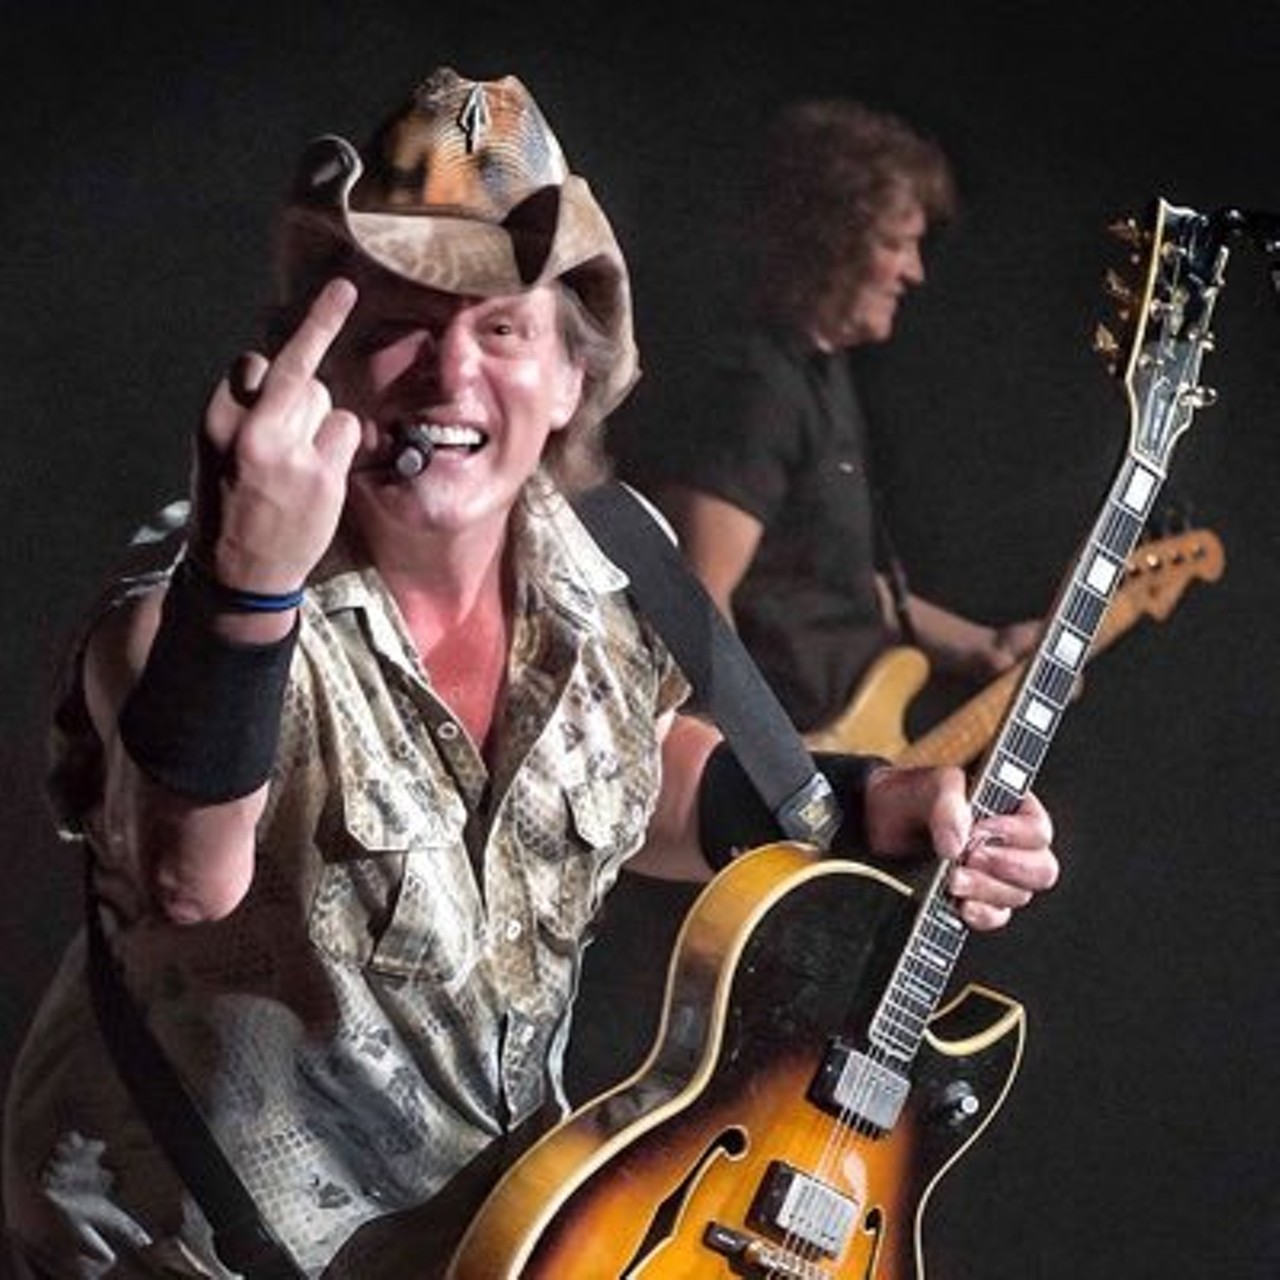 Ted Nugent
Photo via Twitter
Ted Nugent is a rock singer-songwriter from Detroit who is also known for his sharply conservative views and outspoken support for gun ownership rights. During an inflammatory onstage rant in 2007 notably called on Barack Obama to &#147;suck on [his] machine gun.&#148; 
cameo.com/tednugent